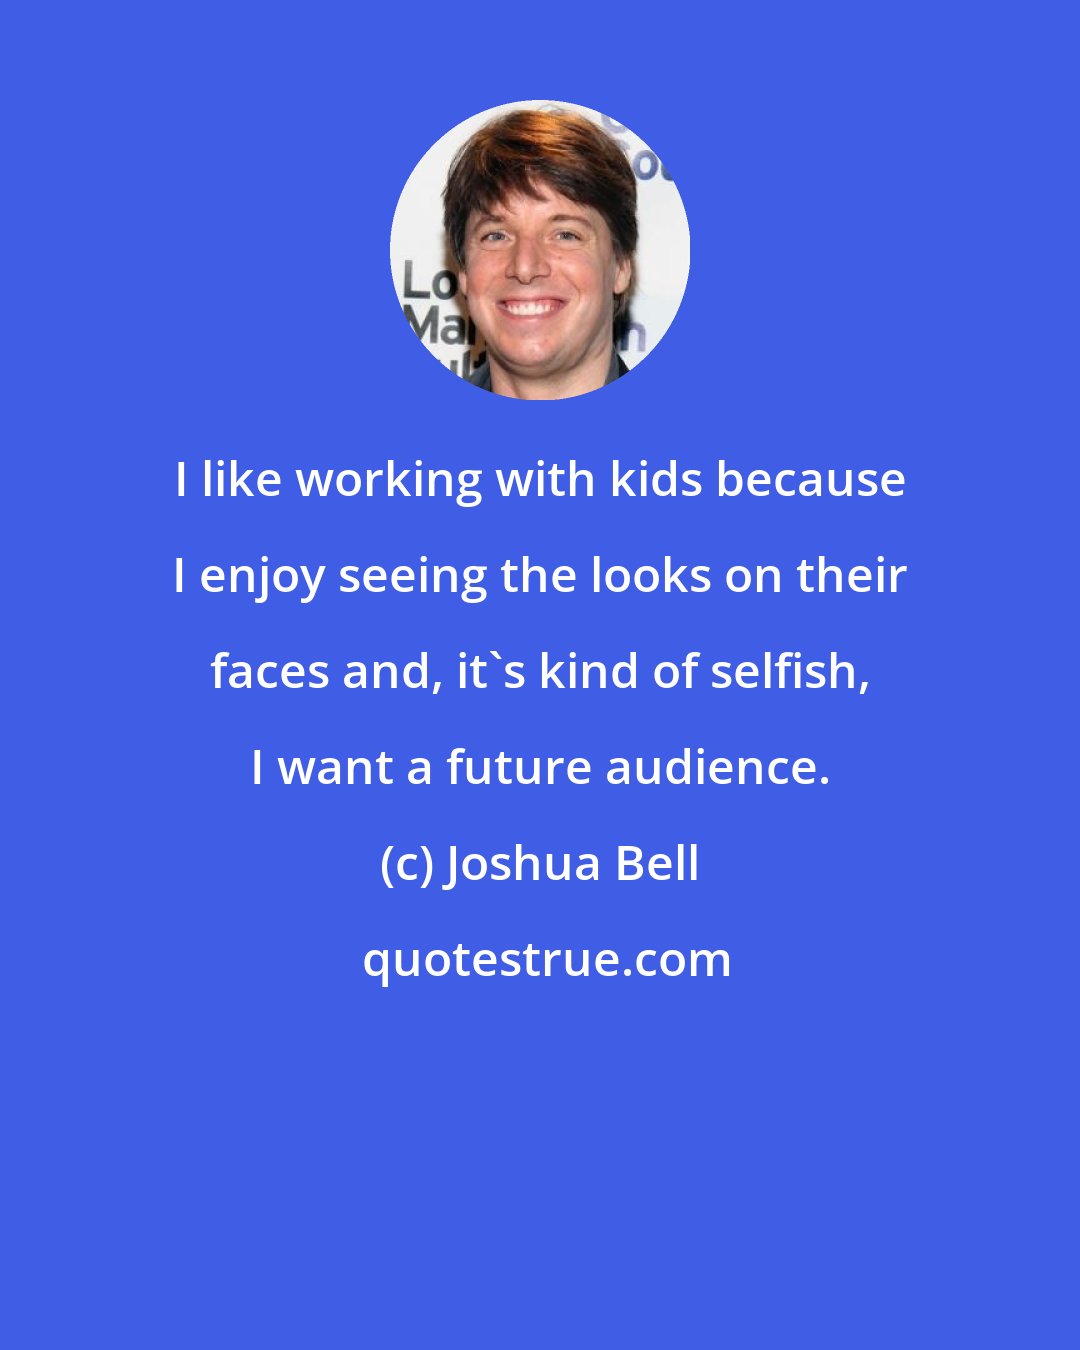 Joshua Bell: I like working with kids because I enjoy seeing the looks on their faces and, it's kind of selfish, I want a future audience.